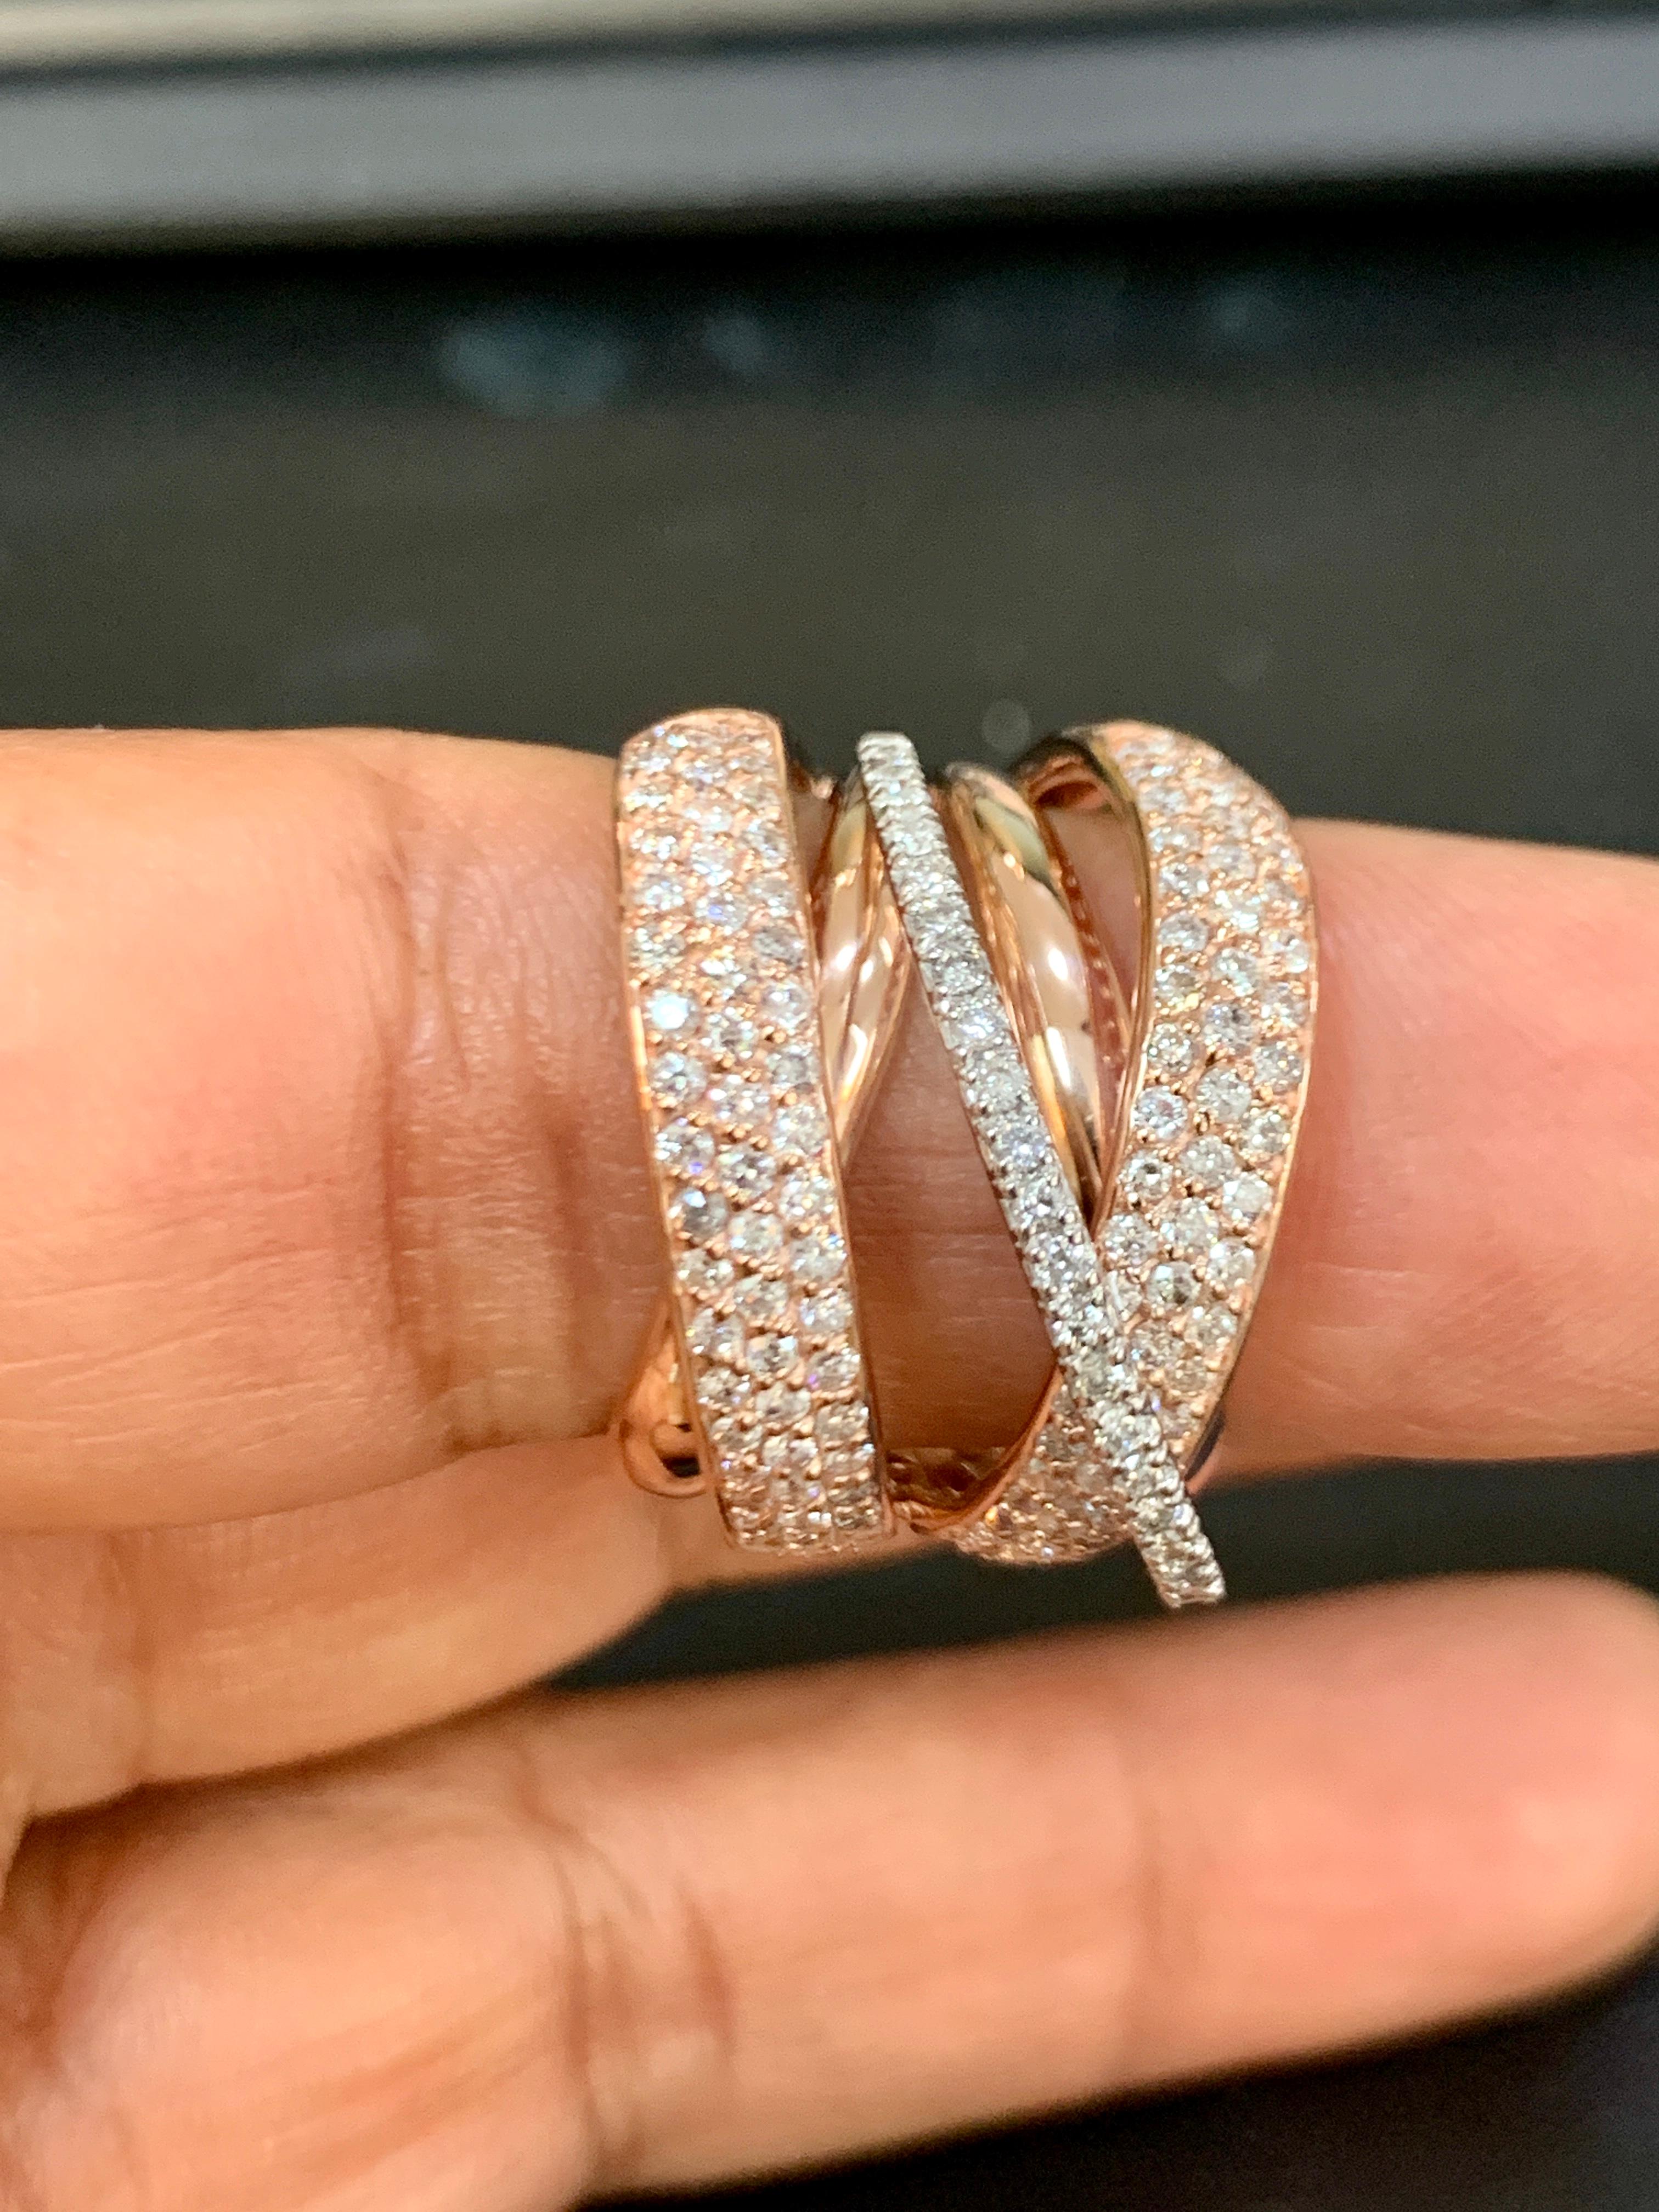 1.6 Carat Diamond  Cocktail Ring 14 Karat Rose Gold Ring
Two Bands of diamonds in rose gold and one band of diamond in white gold.
Total  Approximately 160  Brilliant cut round diamonds 

Diamond SI to VS  quality and G/H Color
This is a very